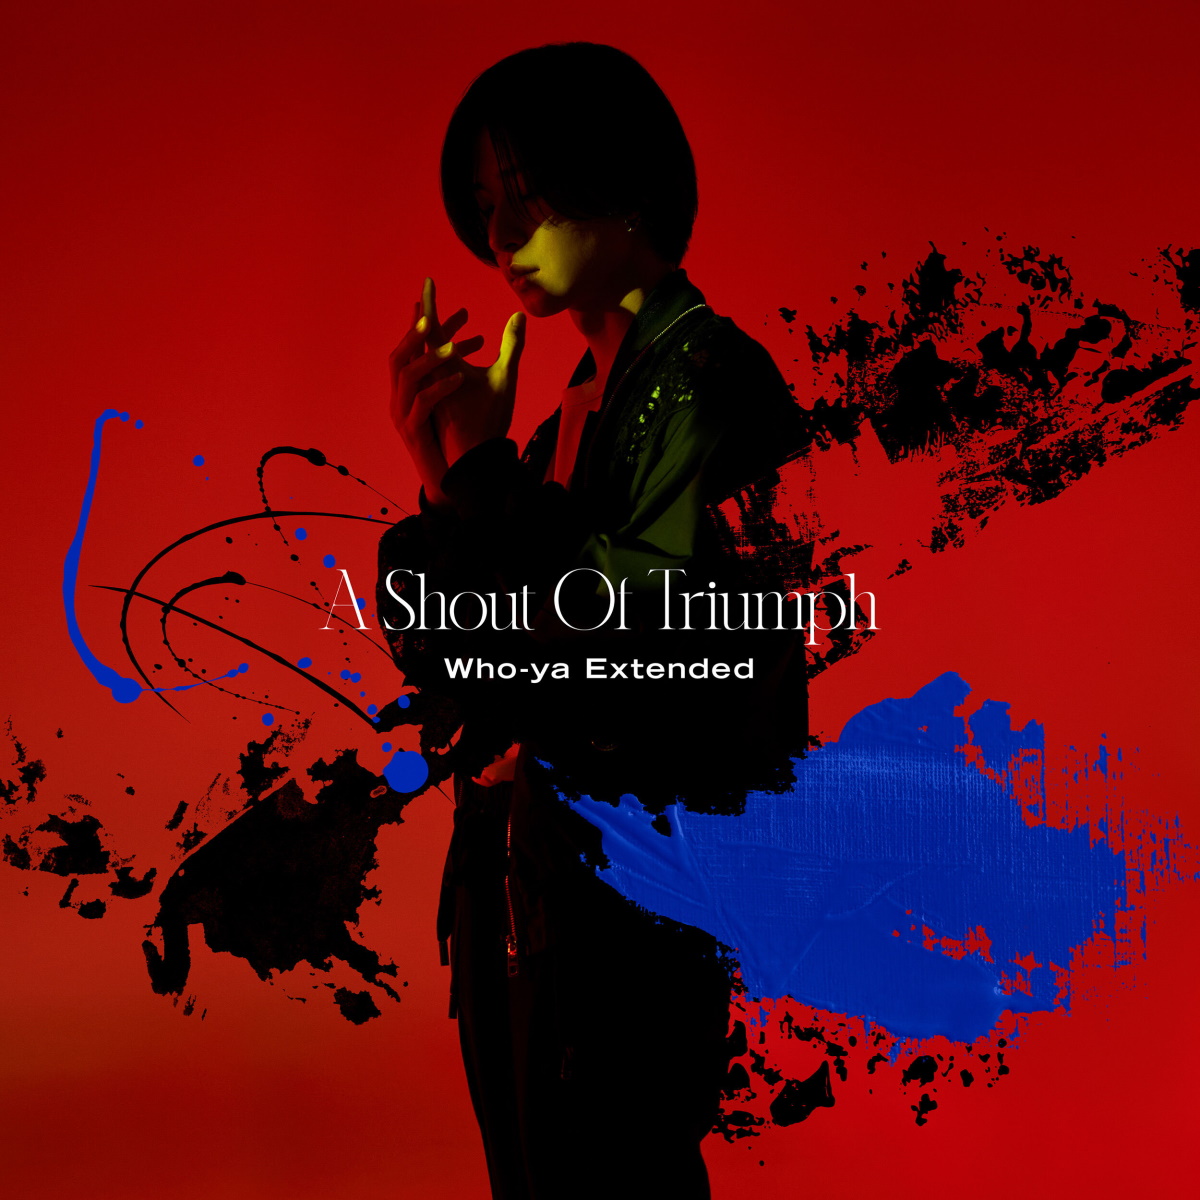 『Who-ya Extended - Re:Painted』収録の『A Shout Of Triumph』ジャケット